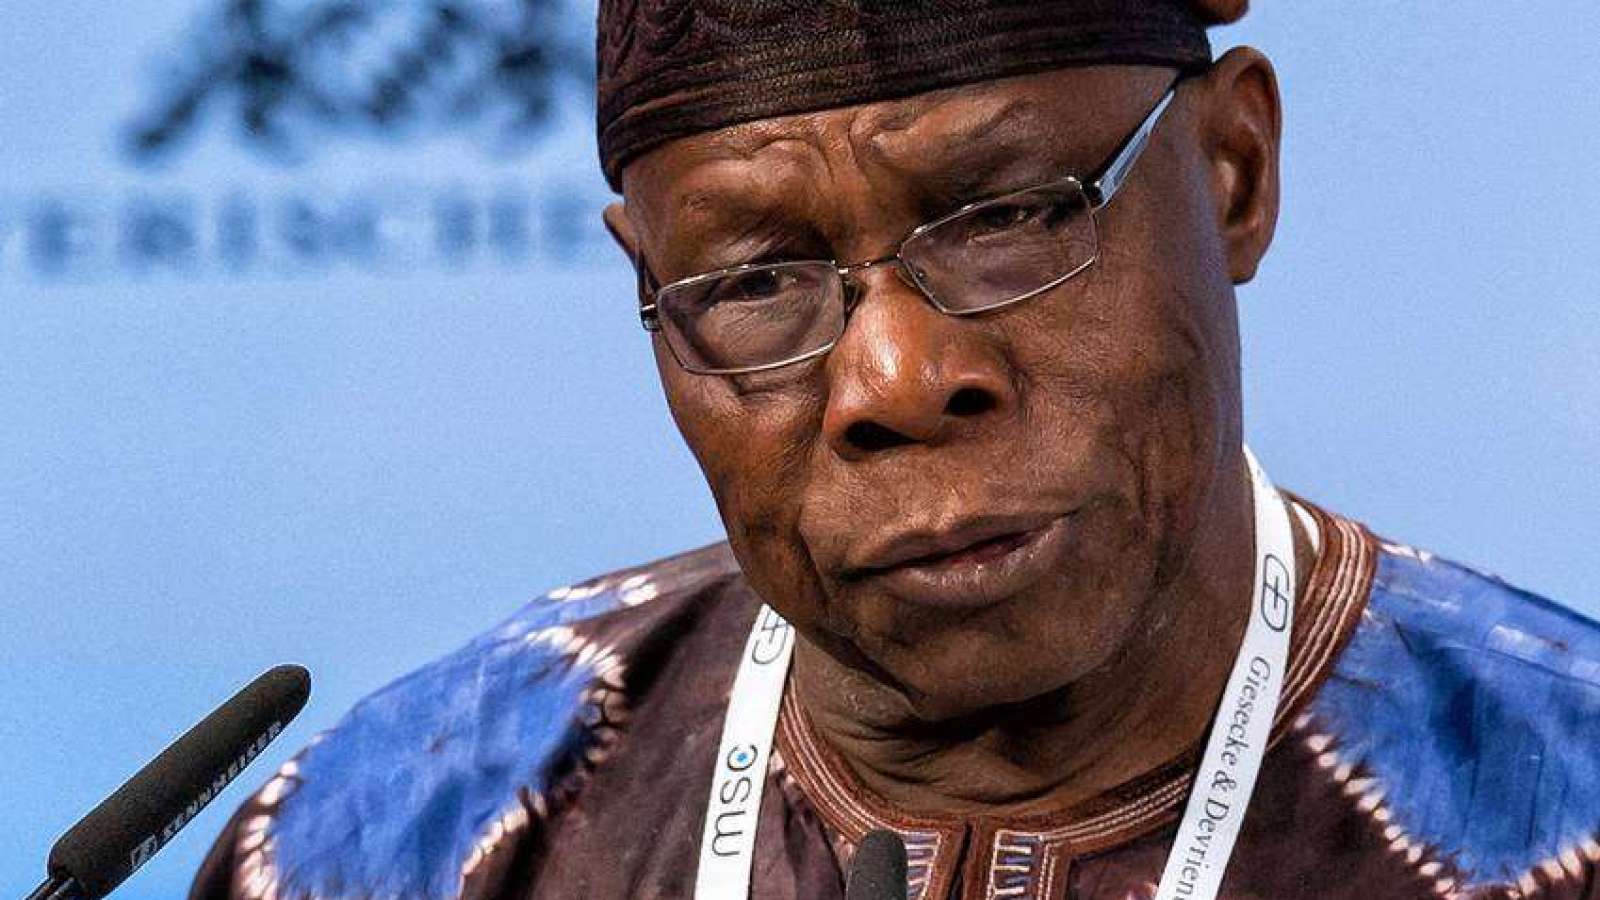 Jesus Christ, The Only Messiah Was Imperfect As Man, And So Is Atiku - Obasanjo 41